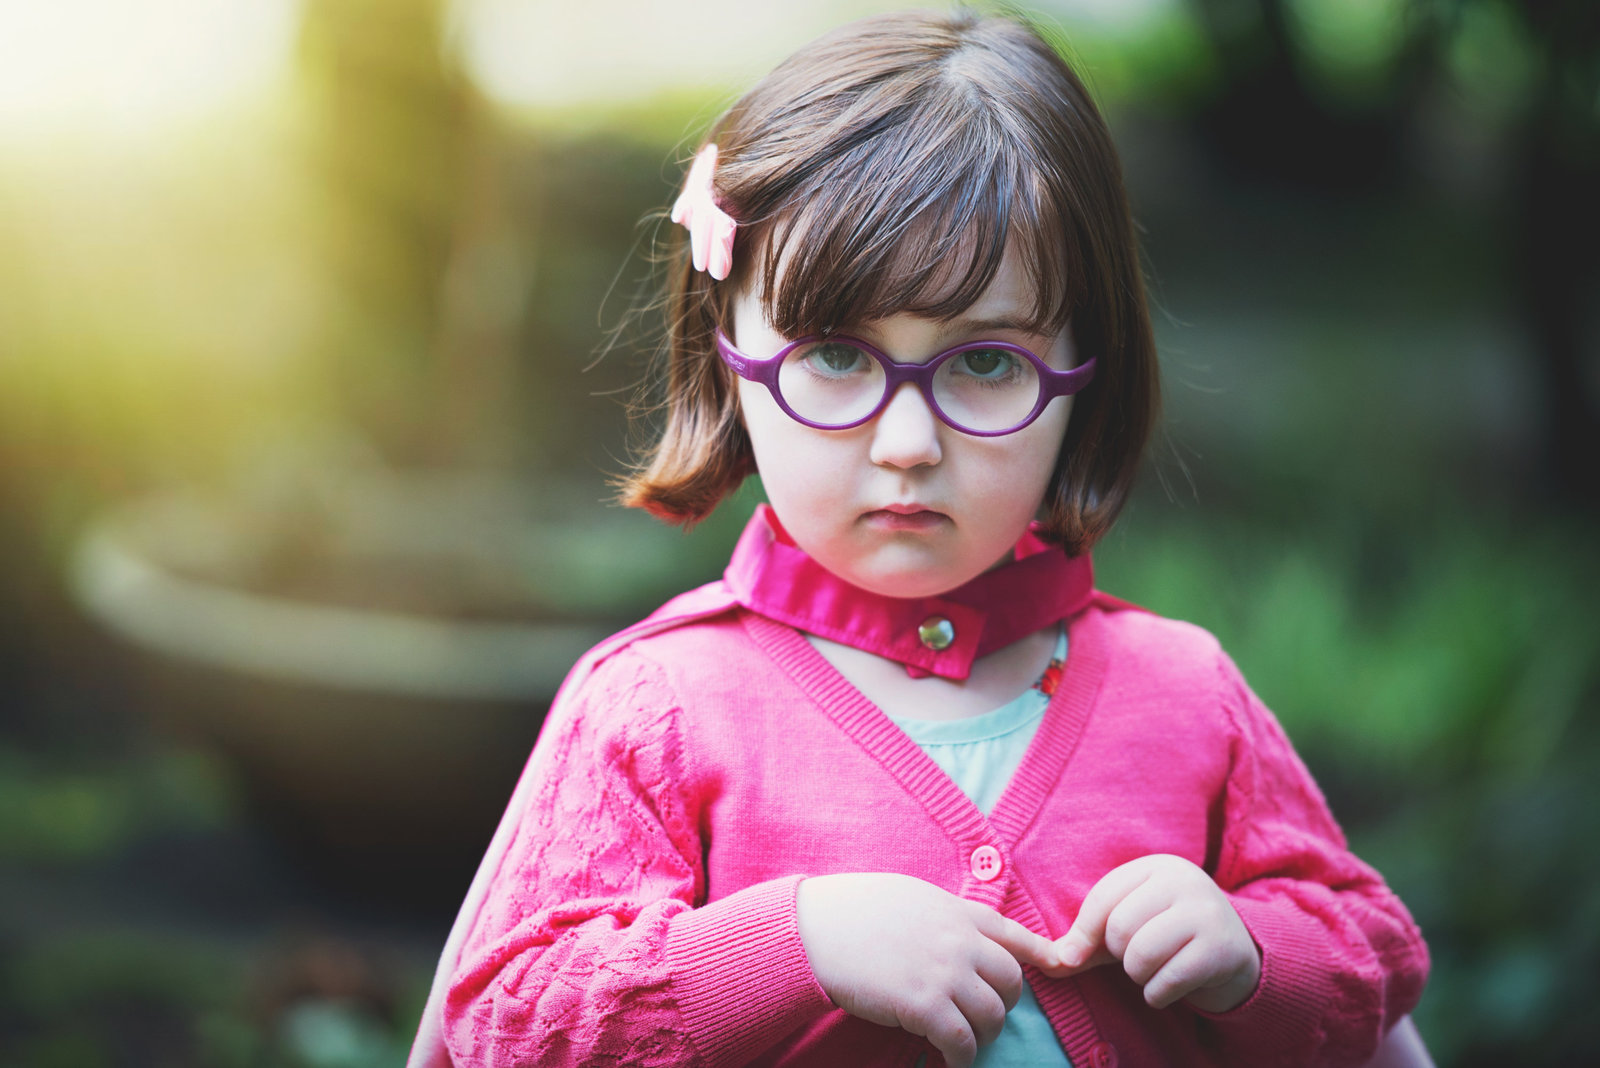 Colorful image of a toddler girl wearing glasses